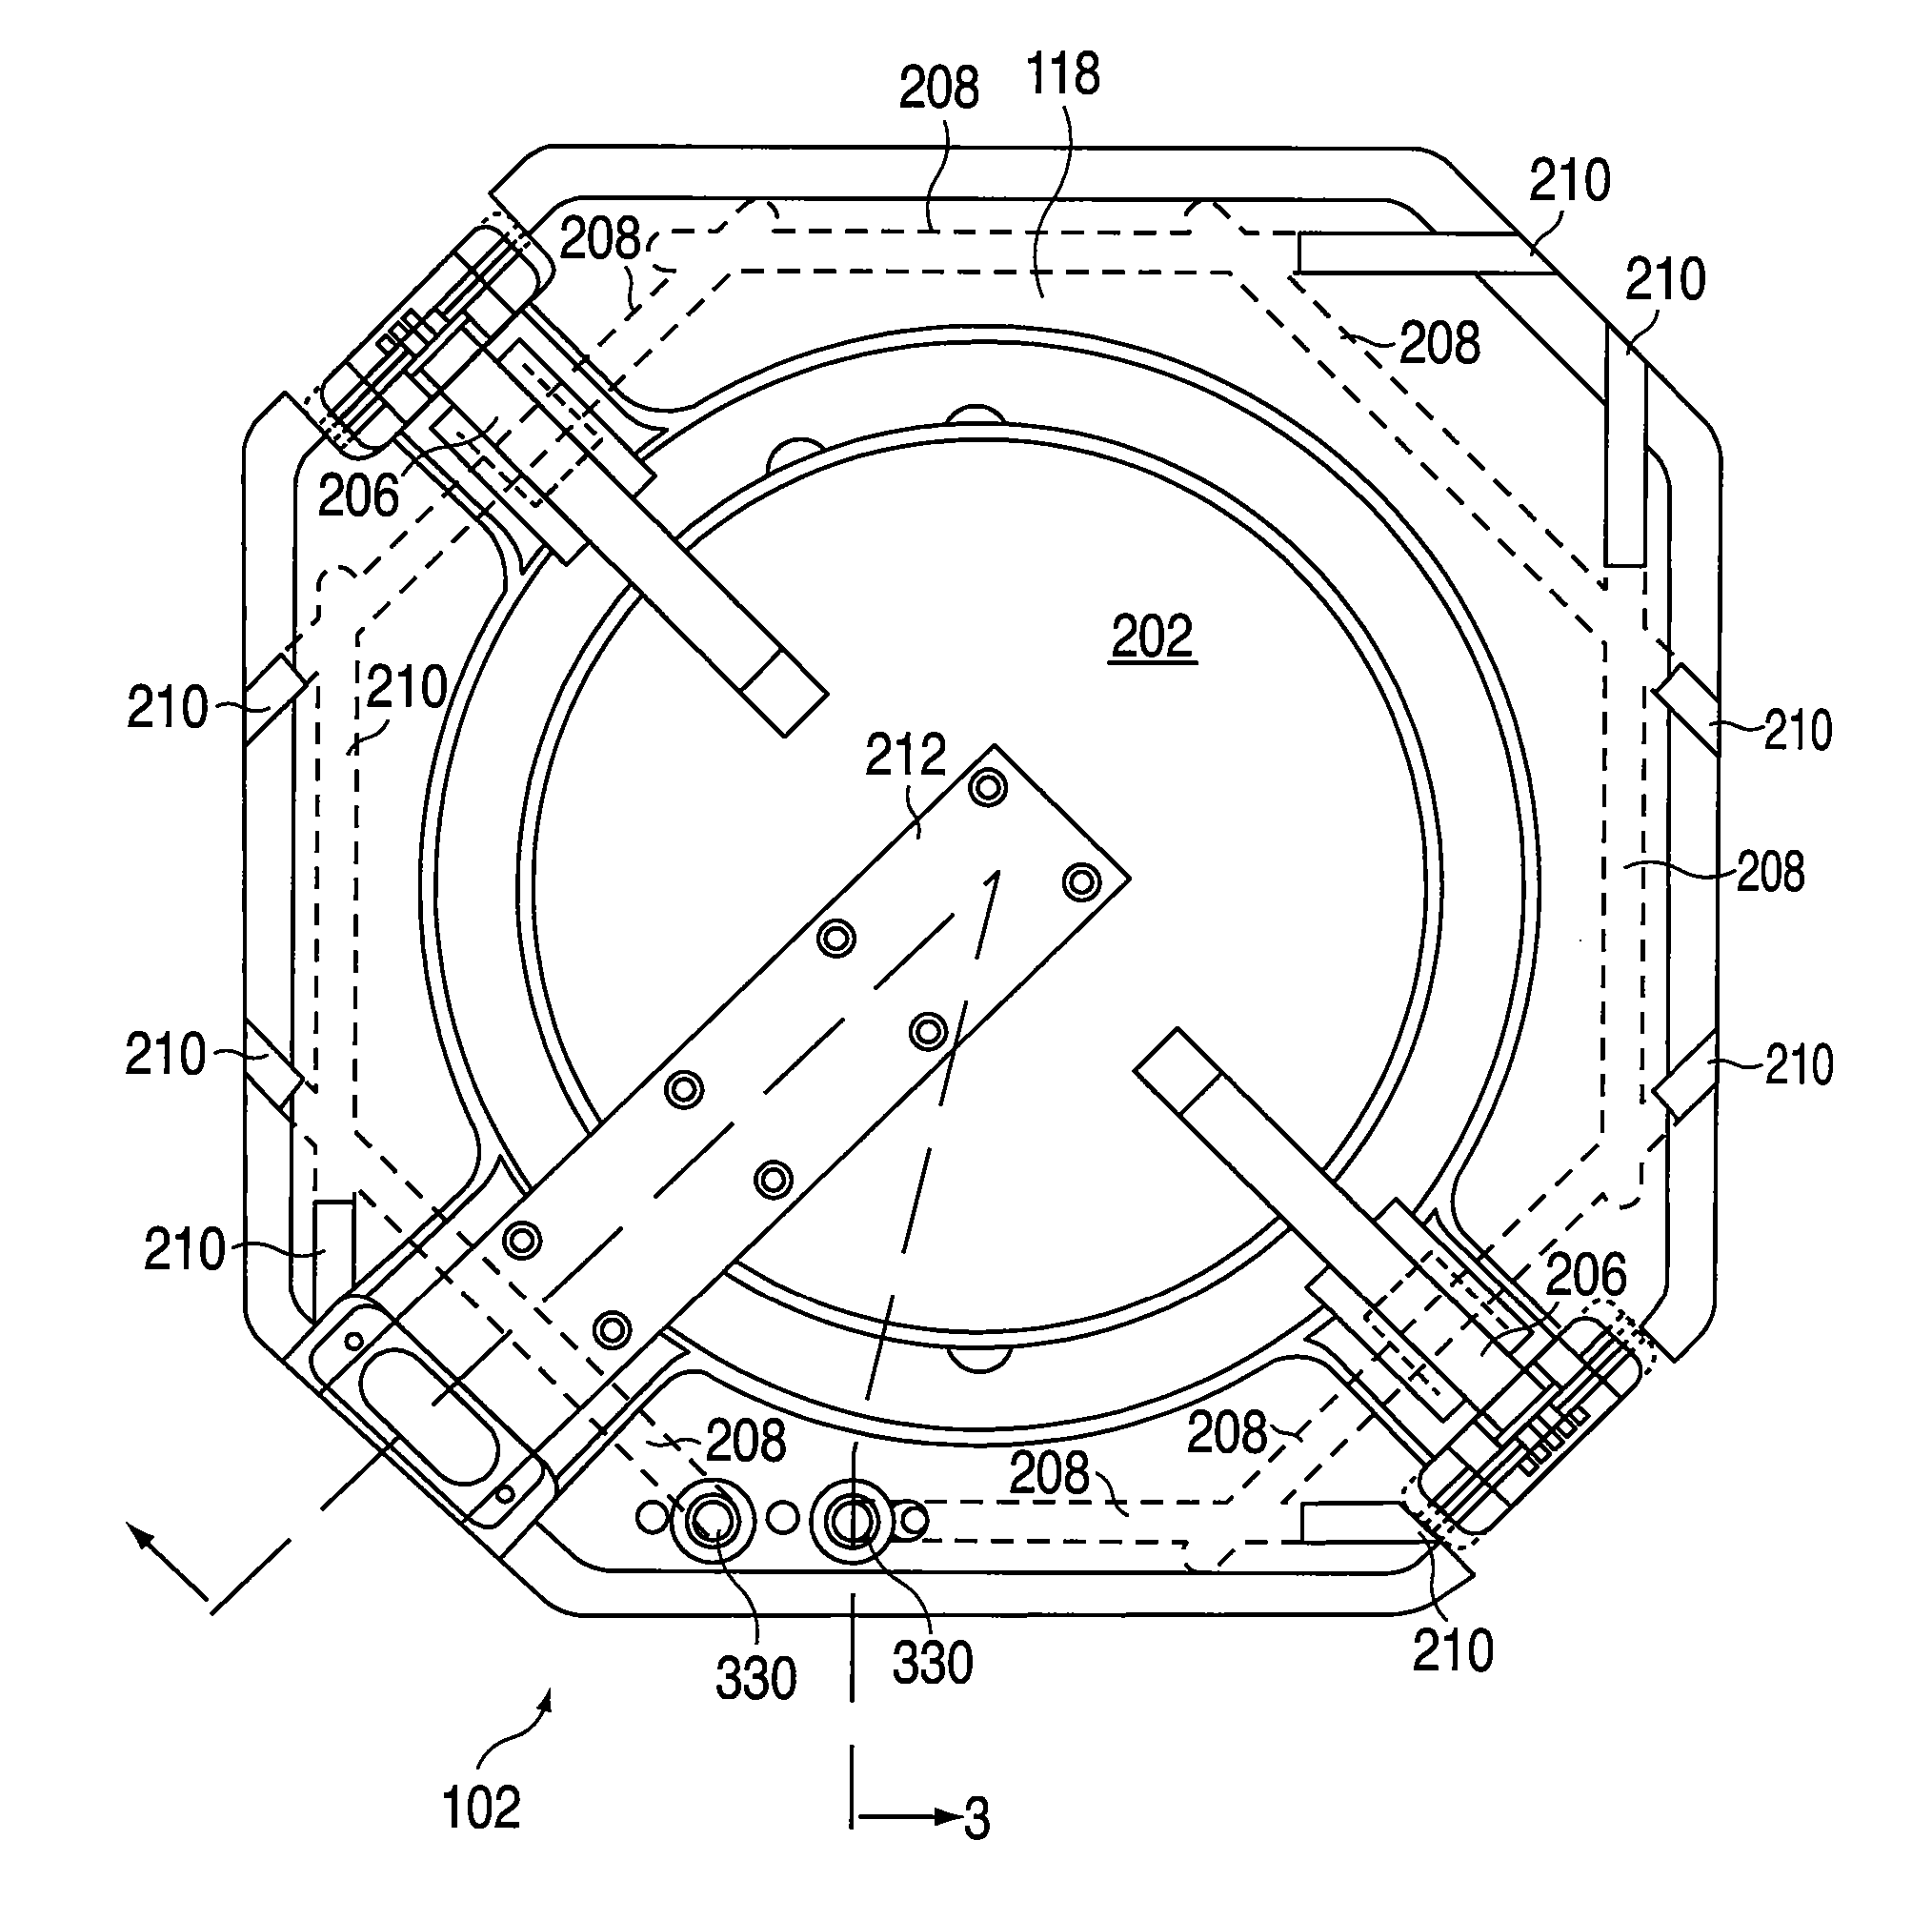 Temperature controlled semiconductor processing chamber liner